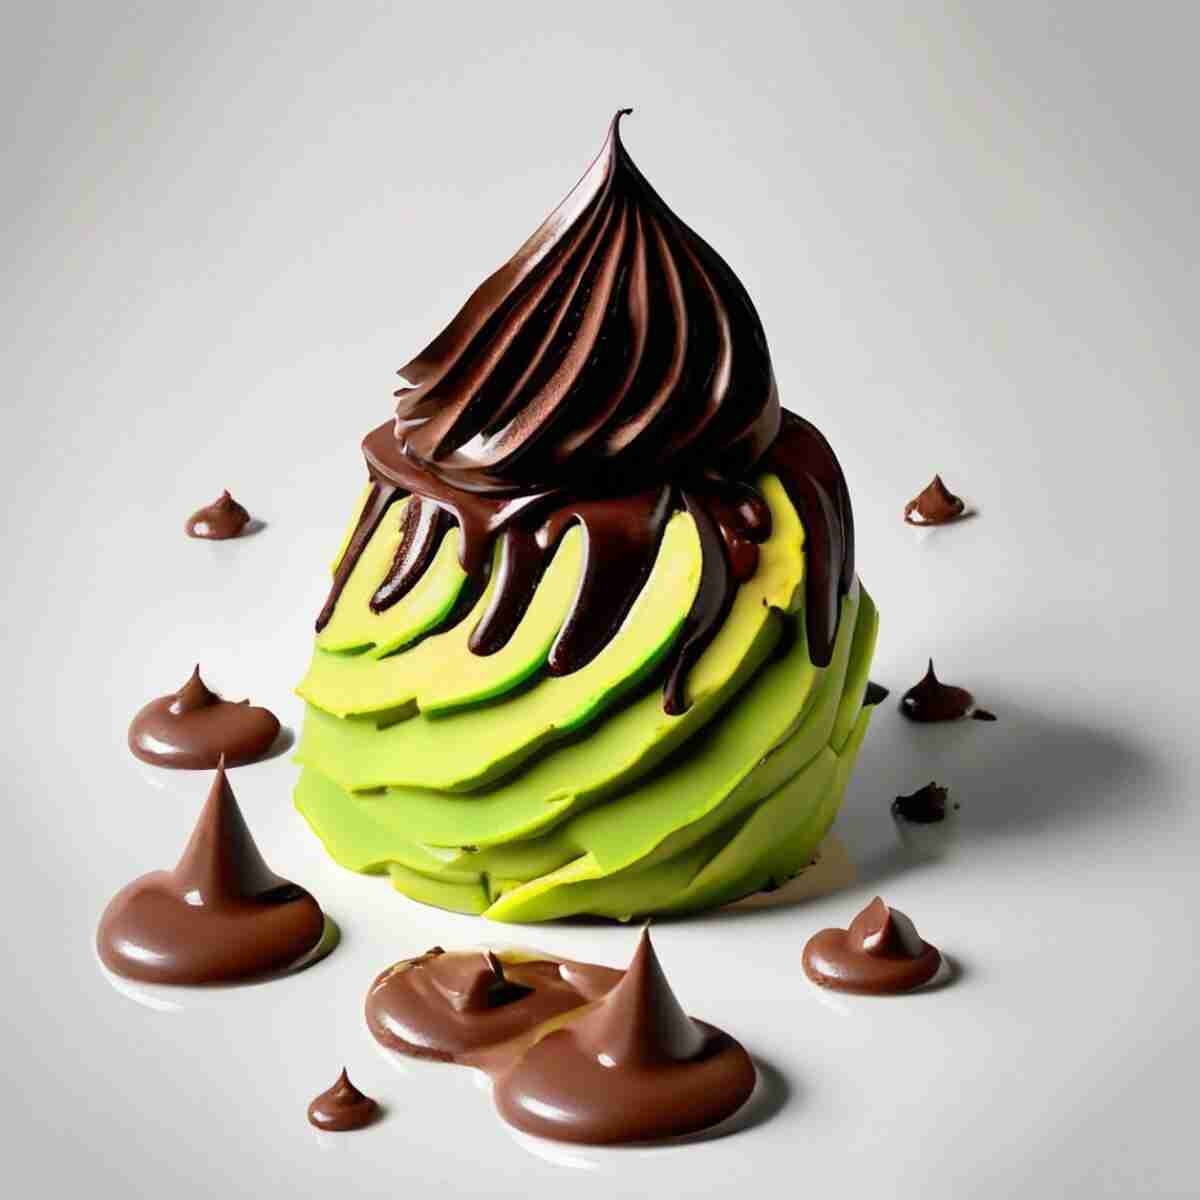 Vegan Buttercream Chocolate Frosting, also called chocolate avocado icing, on avocado slices.